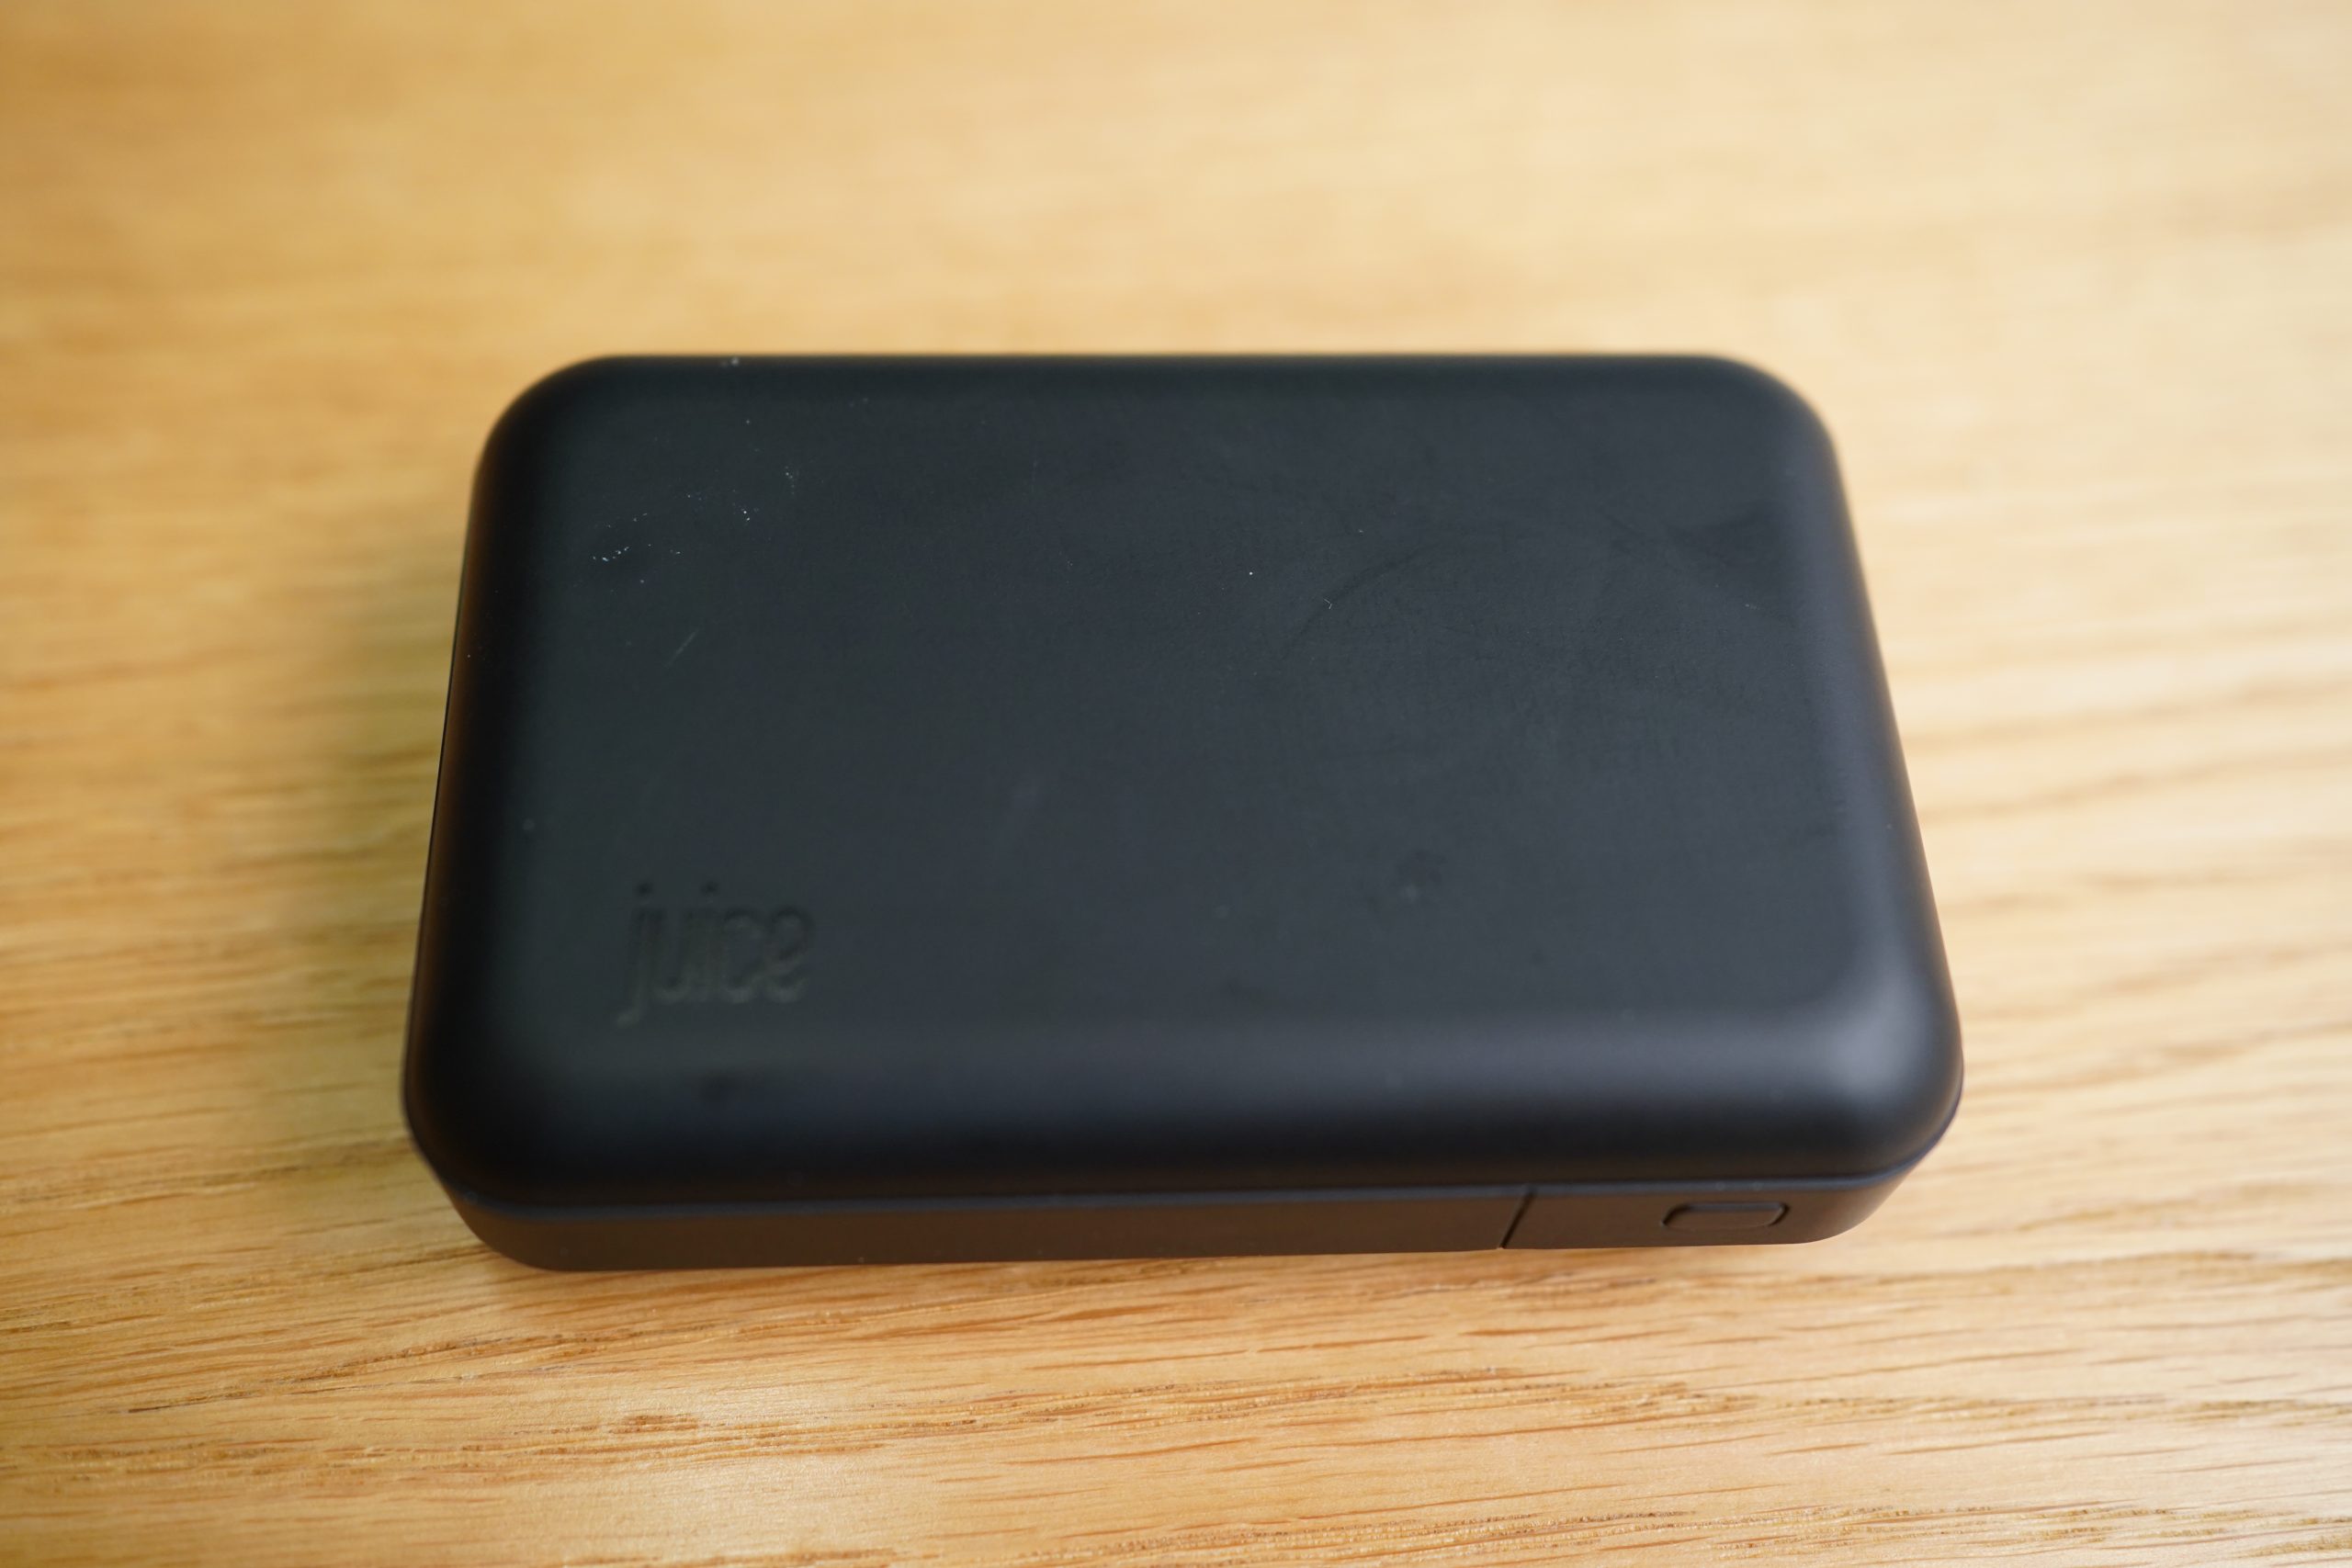 Juice Eco 3 battery pack review